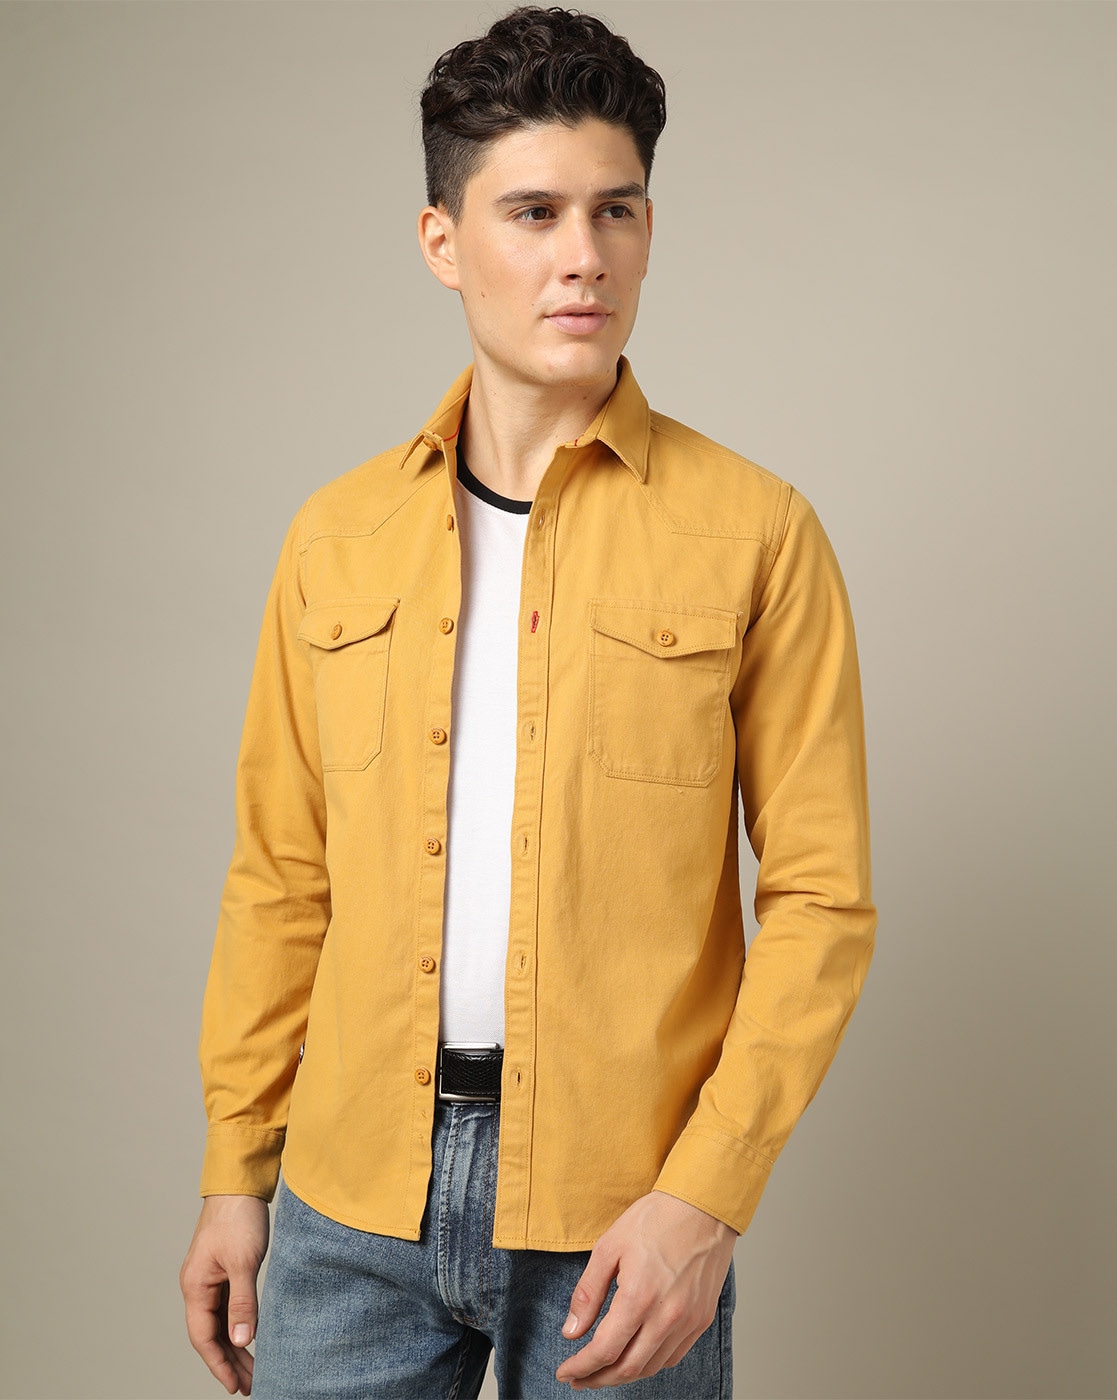 Pepe Jeans Men Solid Casual Yellow Shirt - Buy Pepe Jeans Men Solid Casual Yellow  Shirt Online at Best Prices in India | Flipkart.com